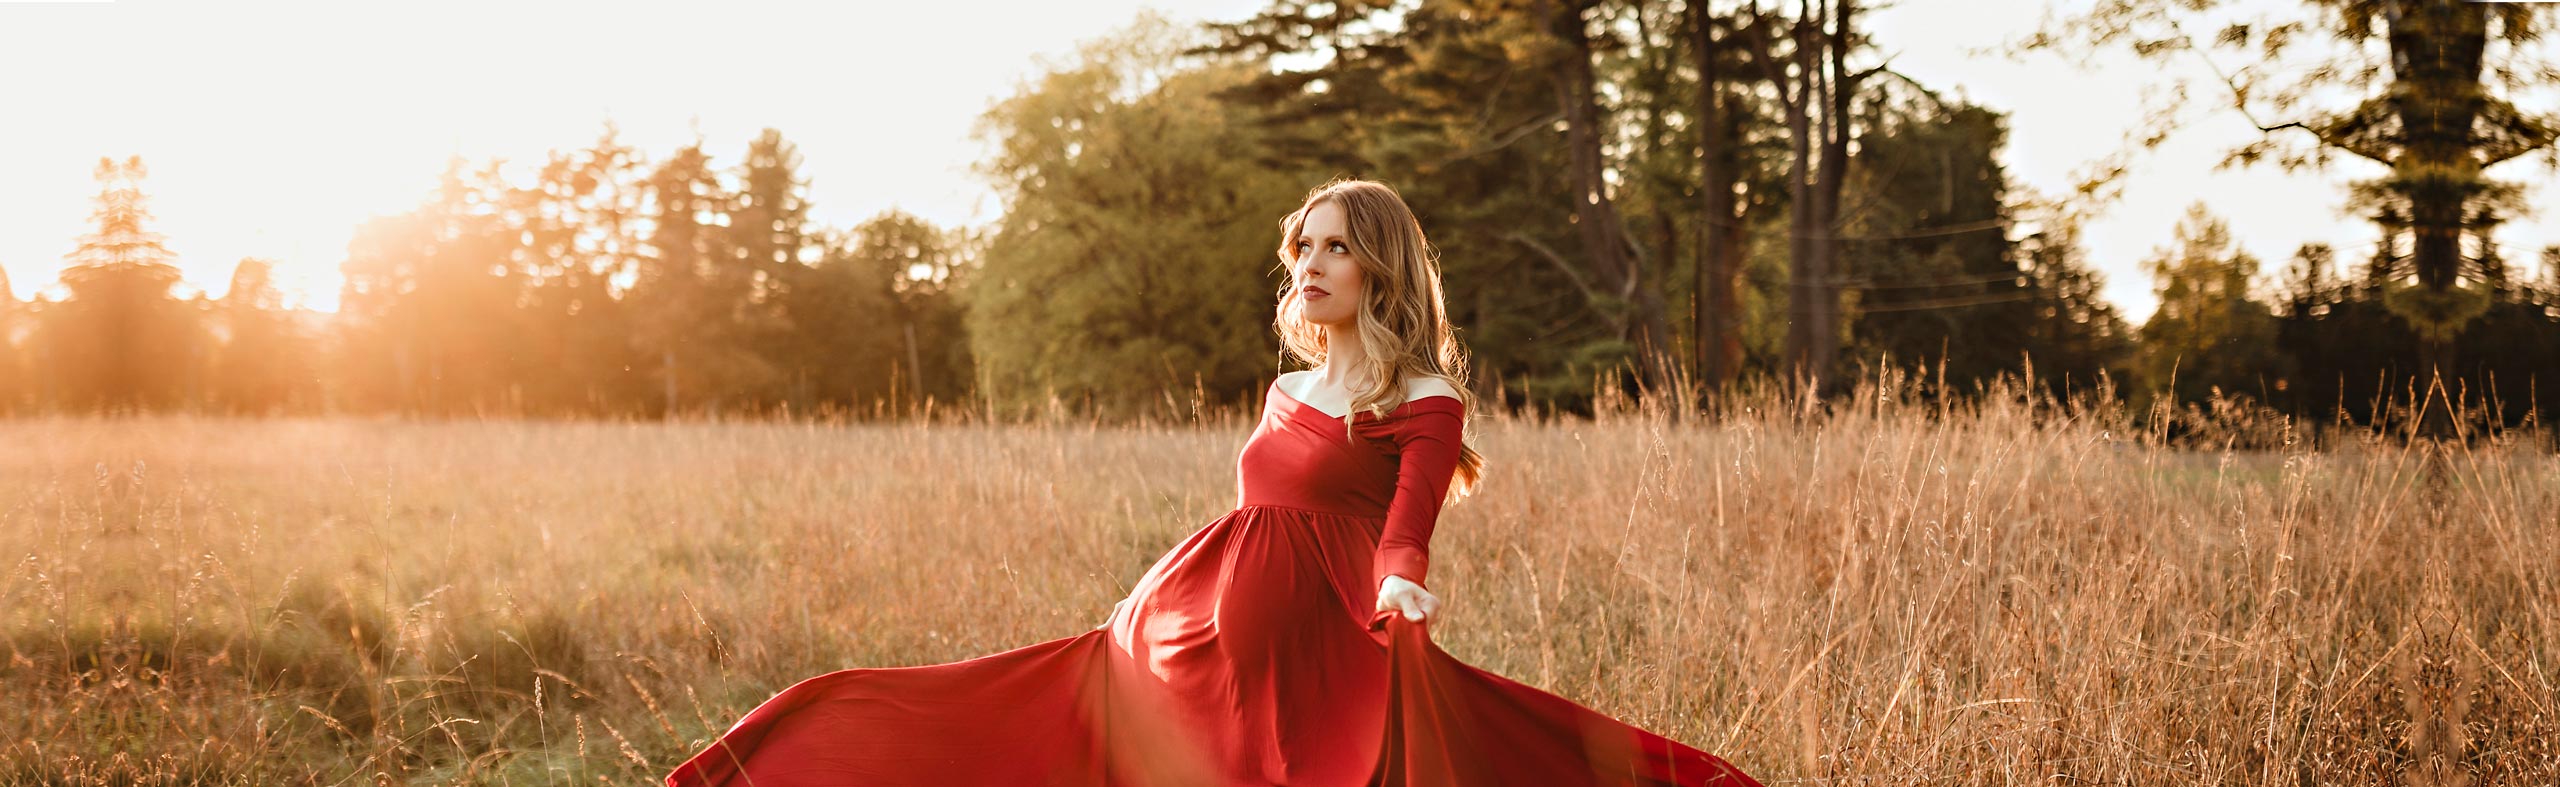 pregnant woman in red dress standing in field